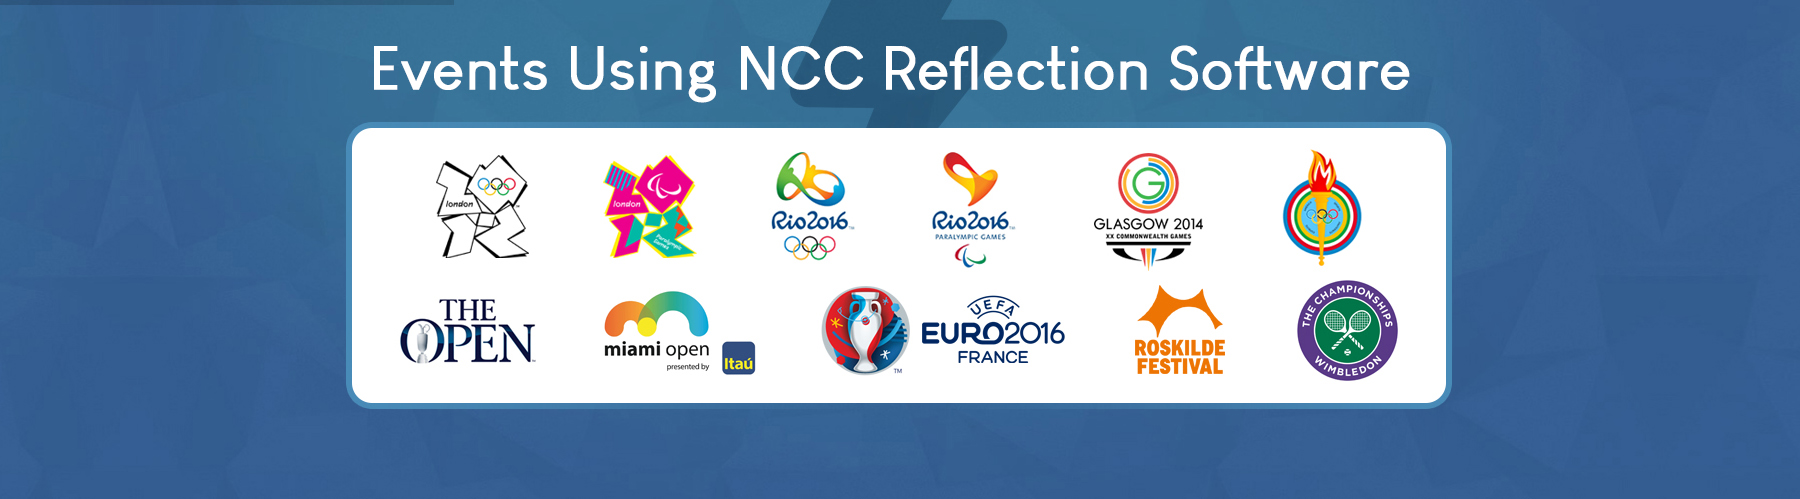 NCC Reflection has been used in the 2012 London Olympics and 2016 Rio Olympicss